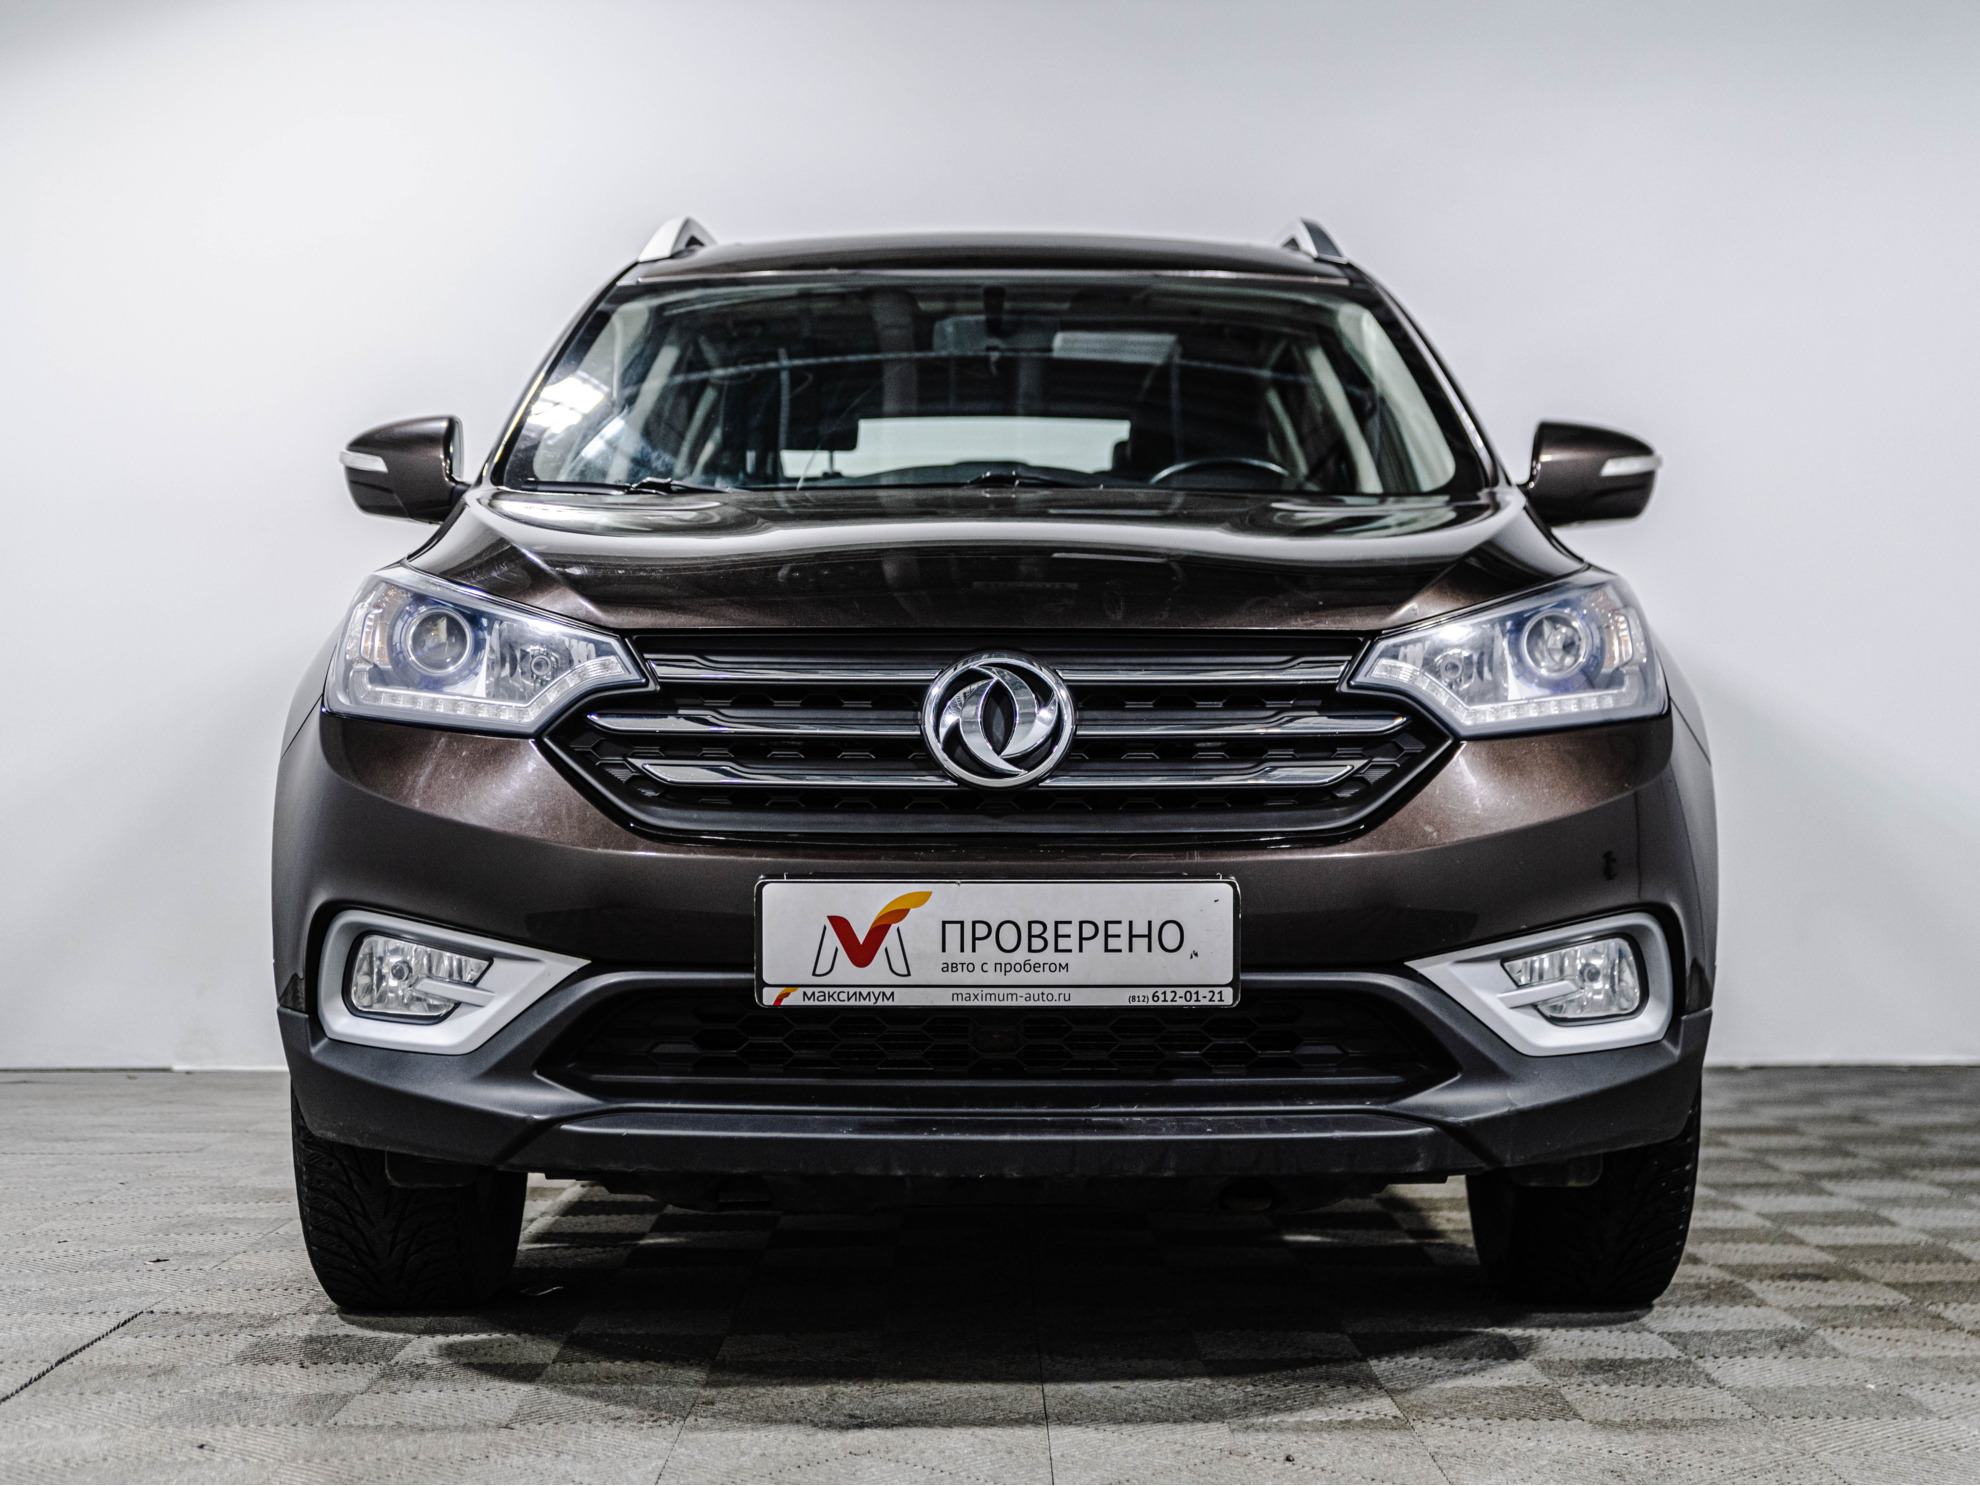 DongFeng AX7